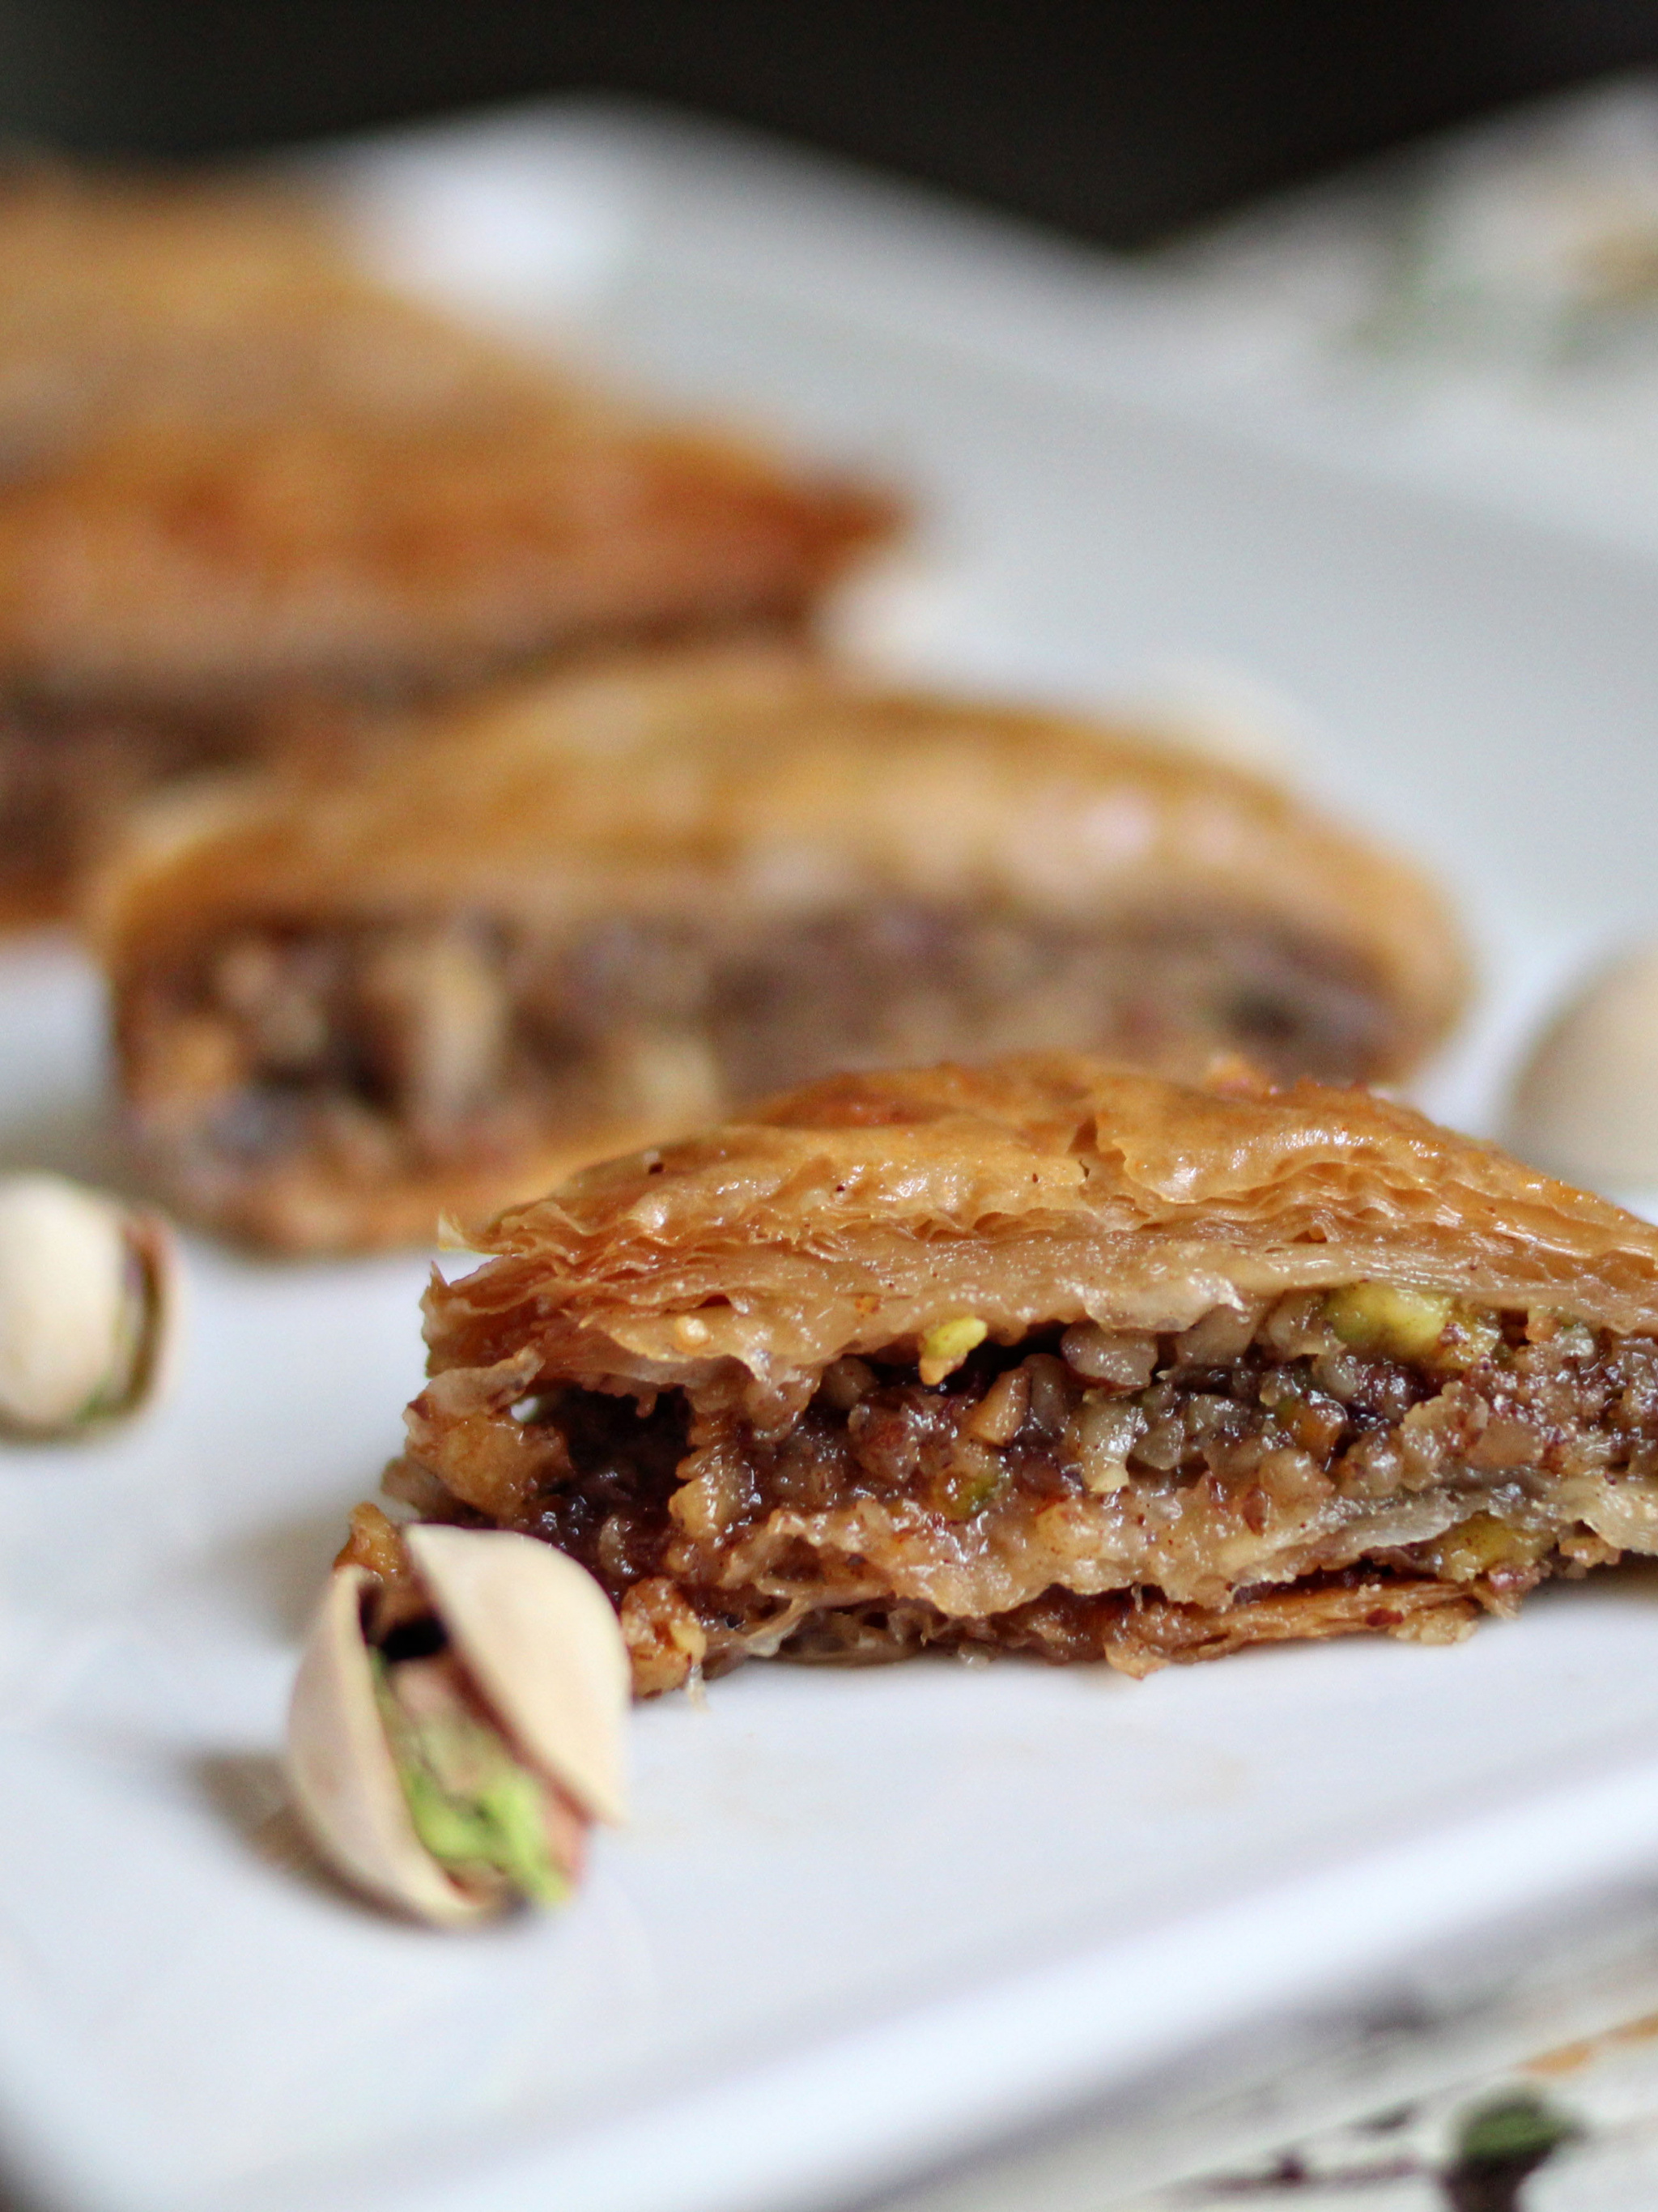 Baklava: One of the most popular sweet pastries of Ottoman cuisine. 2050x2740 HD Wallpaper.